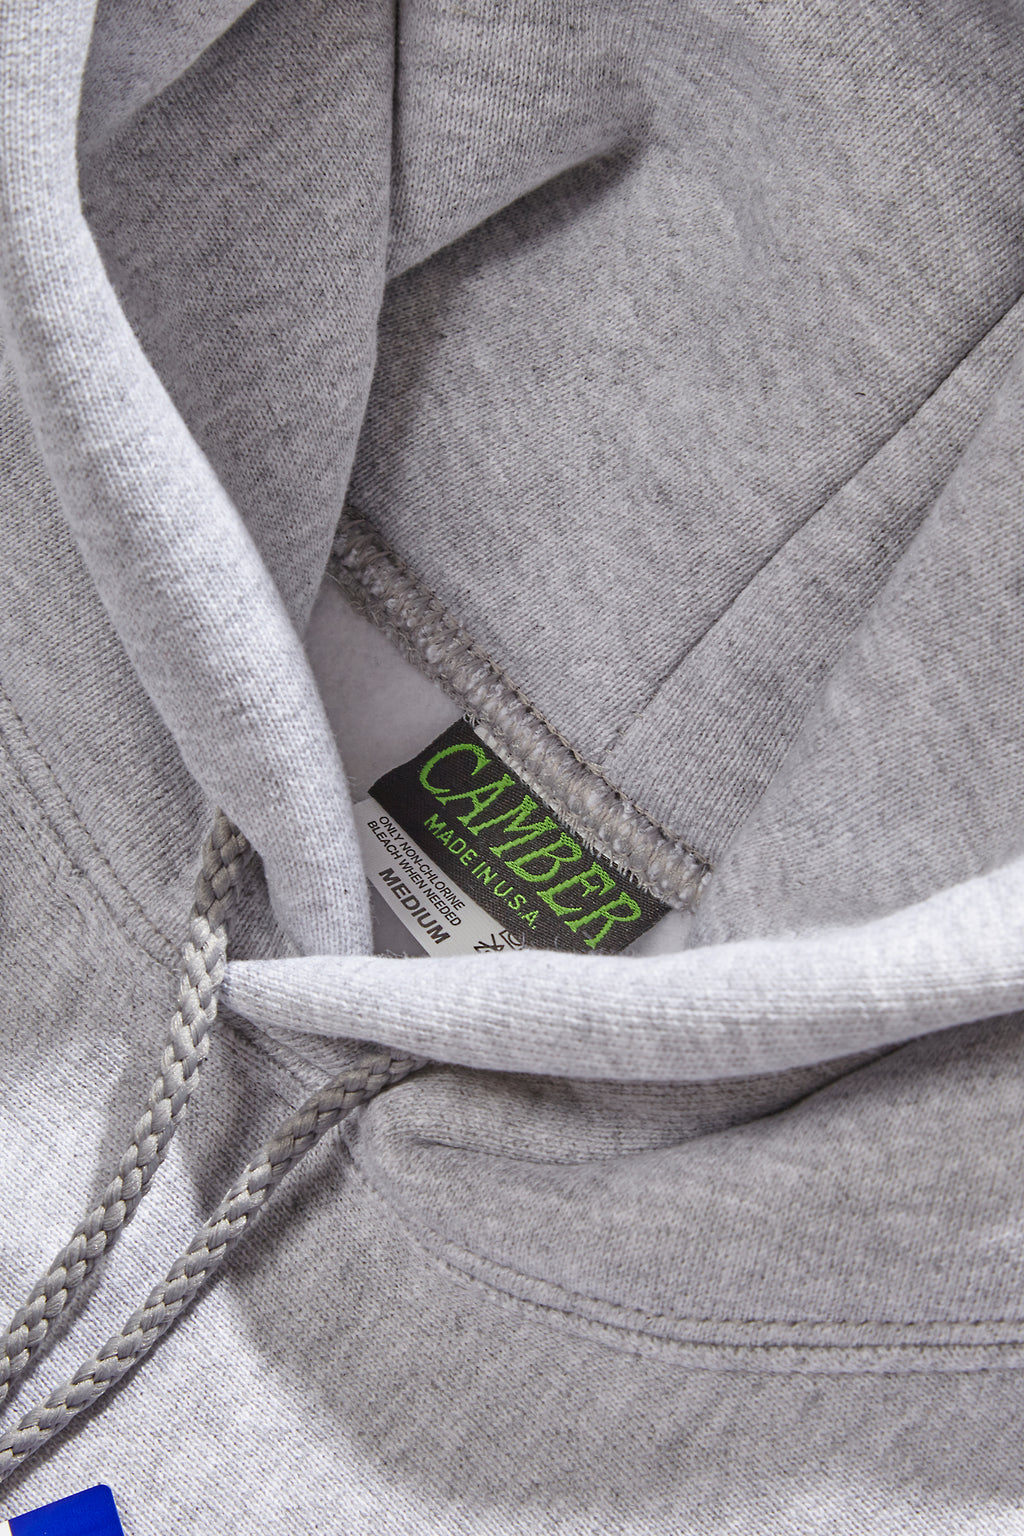 Camber USA - 232 12oz Pullover Hoodie - Ash Grey